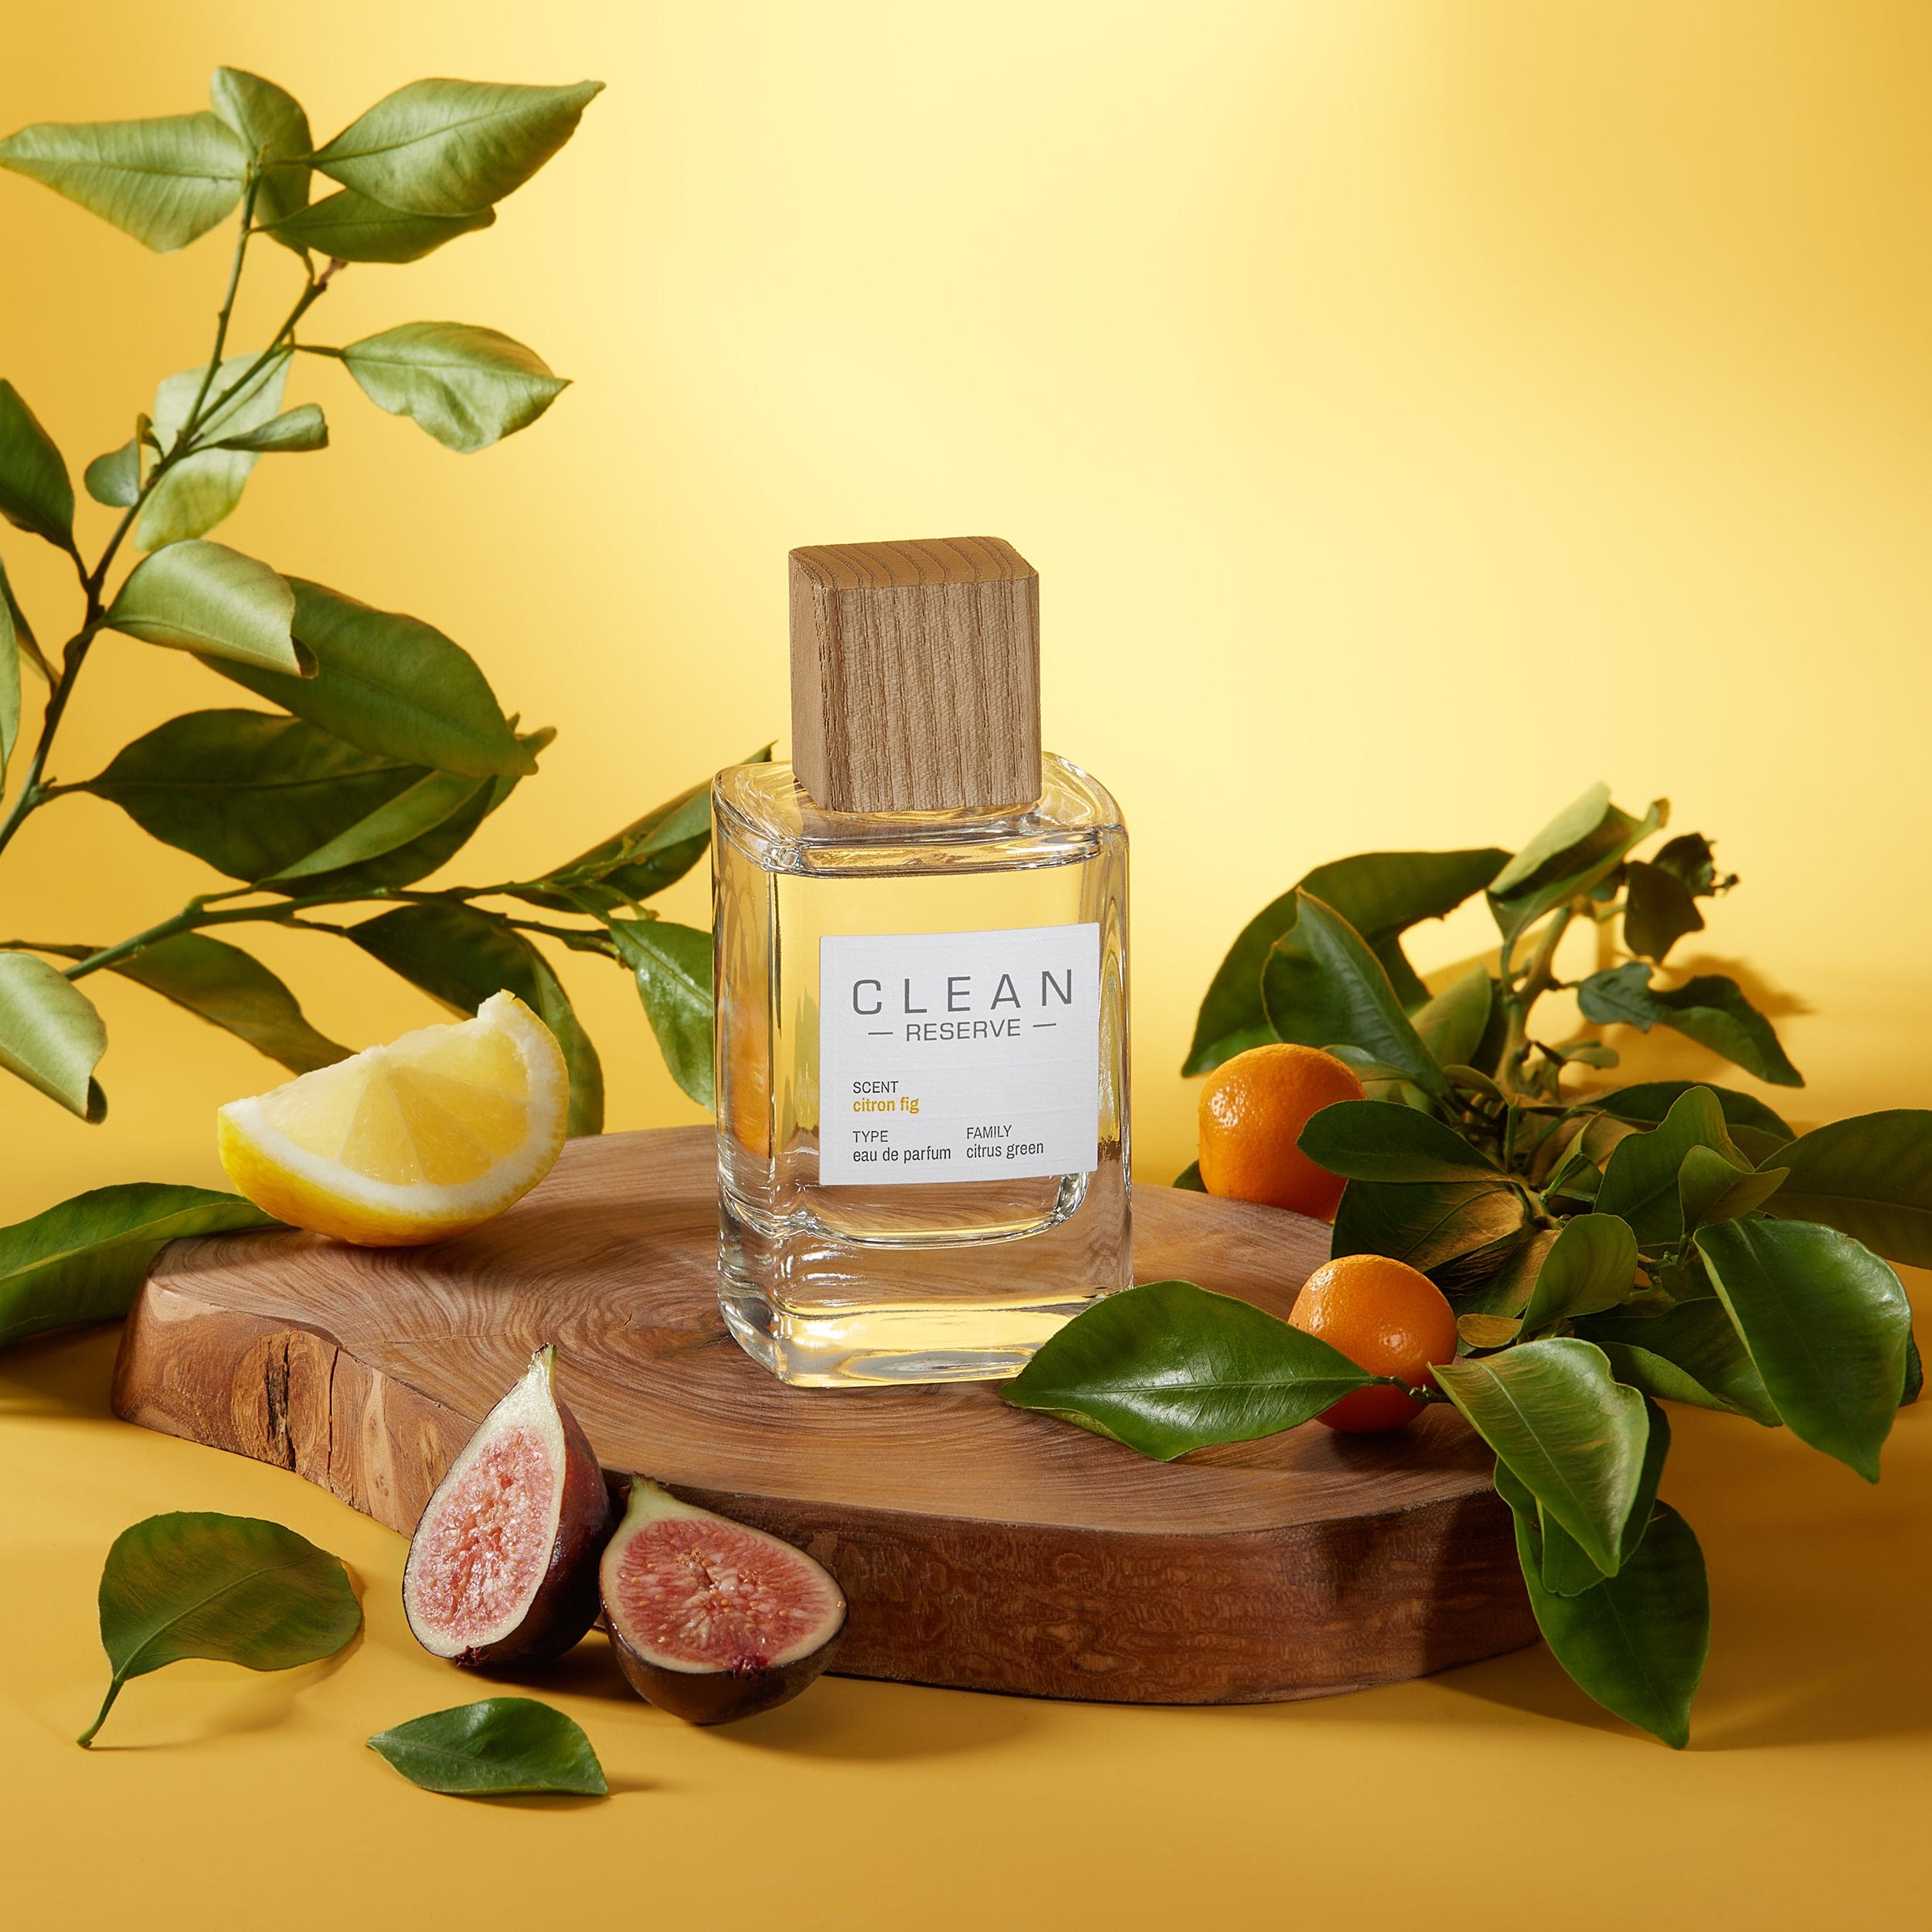 CLEAN RESERVE Citron Fig Fragrance – Three Sizes – CLEAN Beauty 